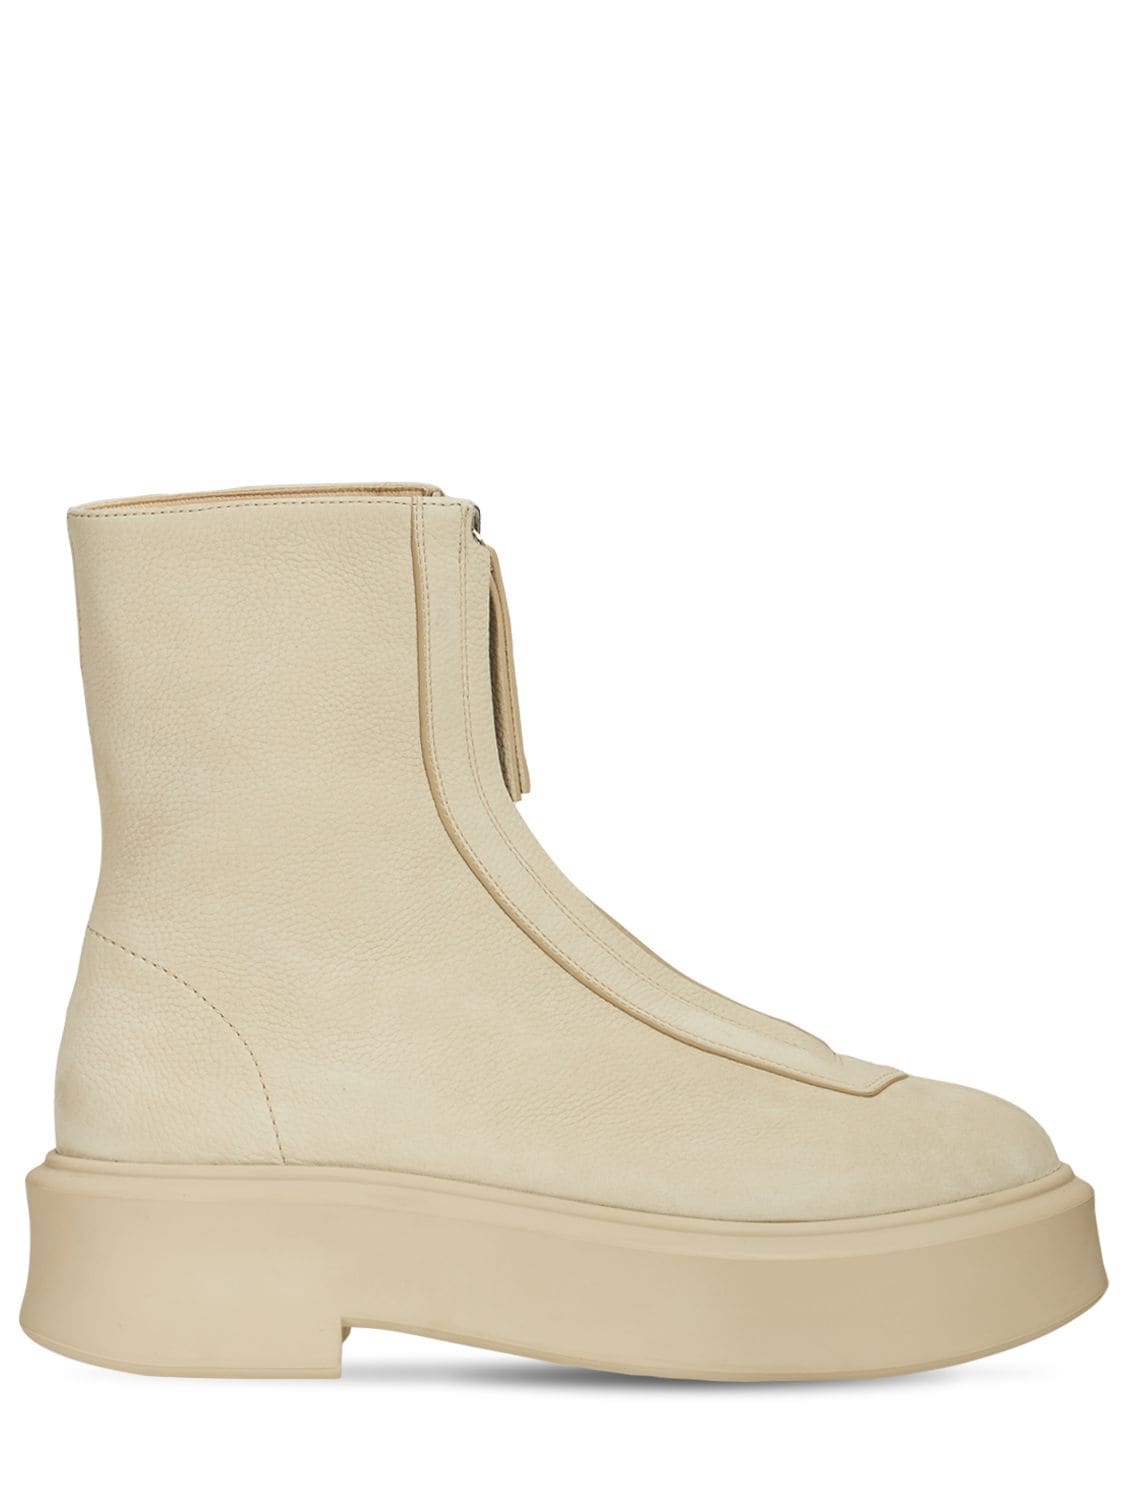 THE ROW 50mm Zipped Leather Ankle Boots